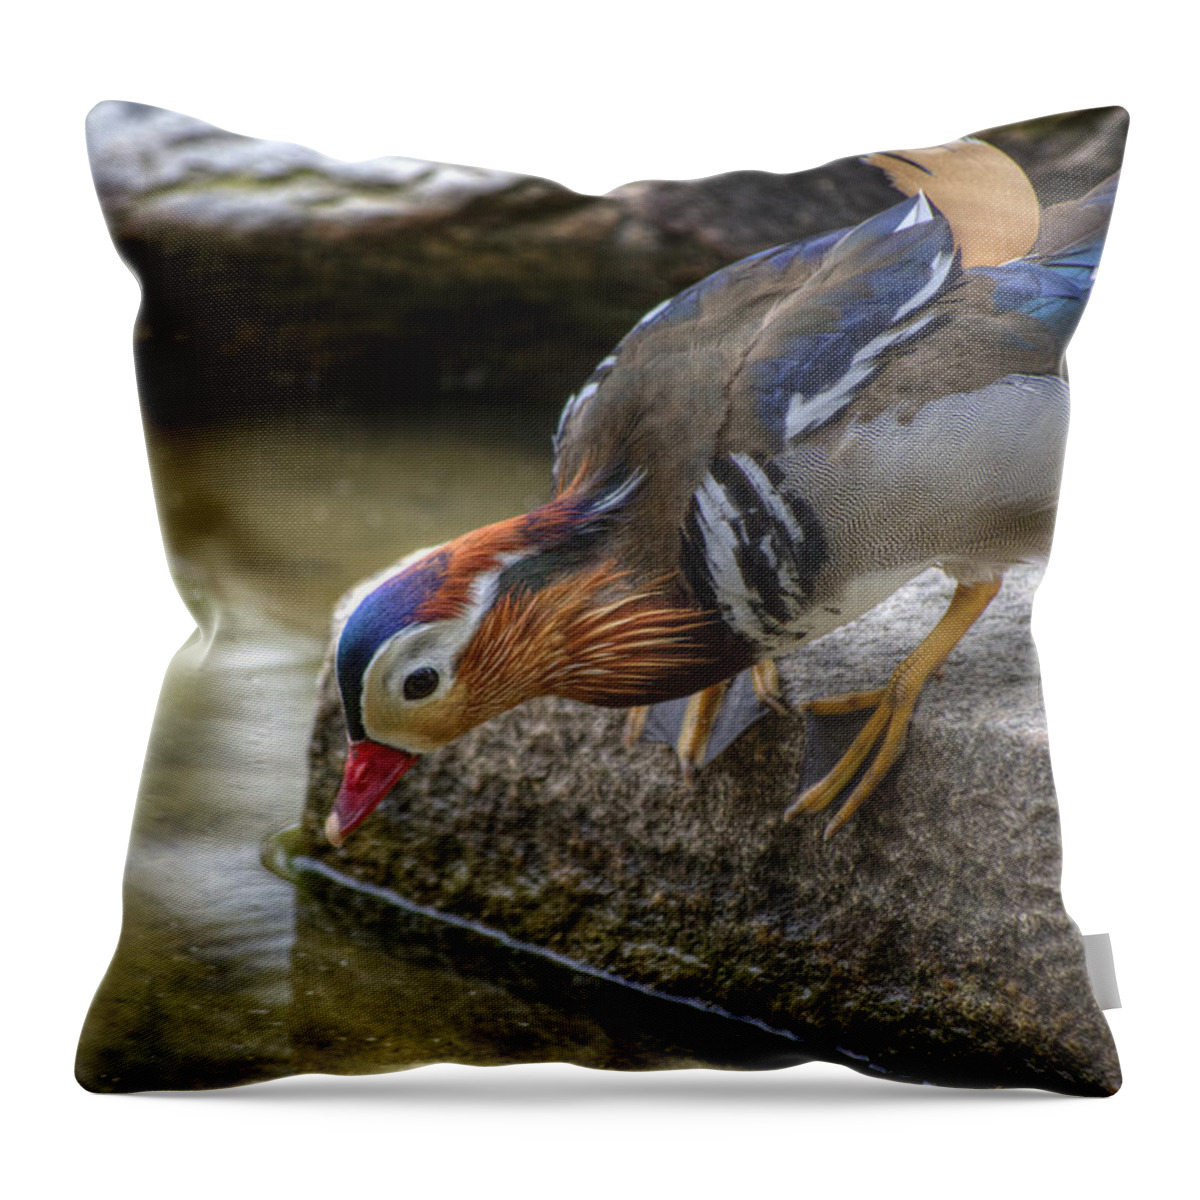 Duck Throw Pillow featuring the photograph Duck On The Edge by Diego Re